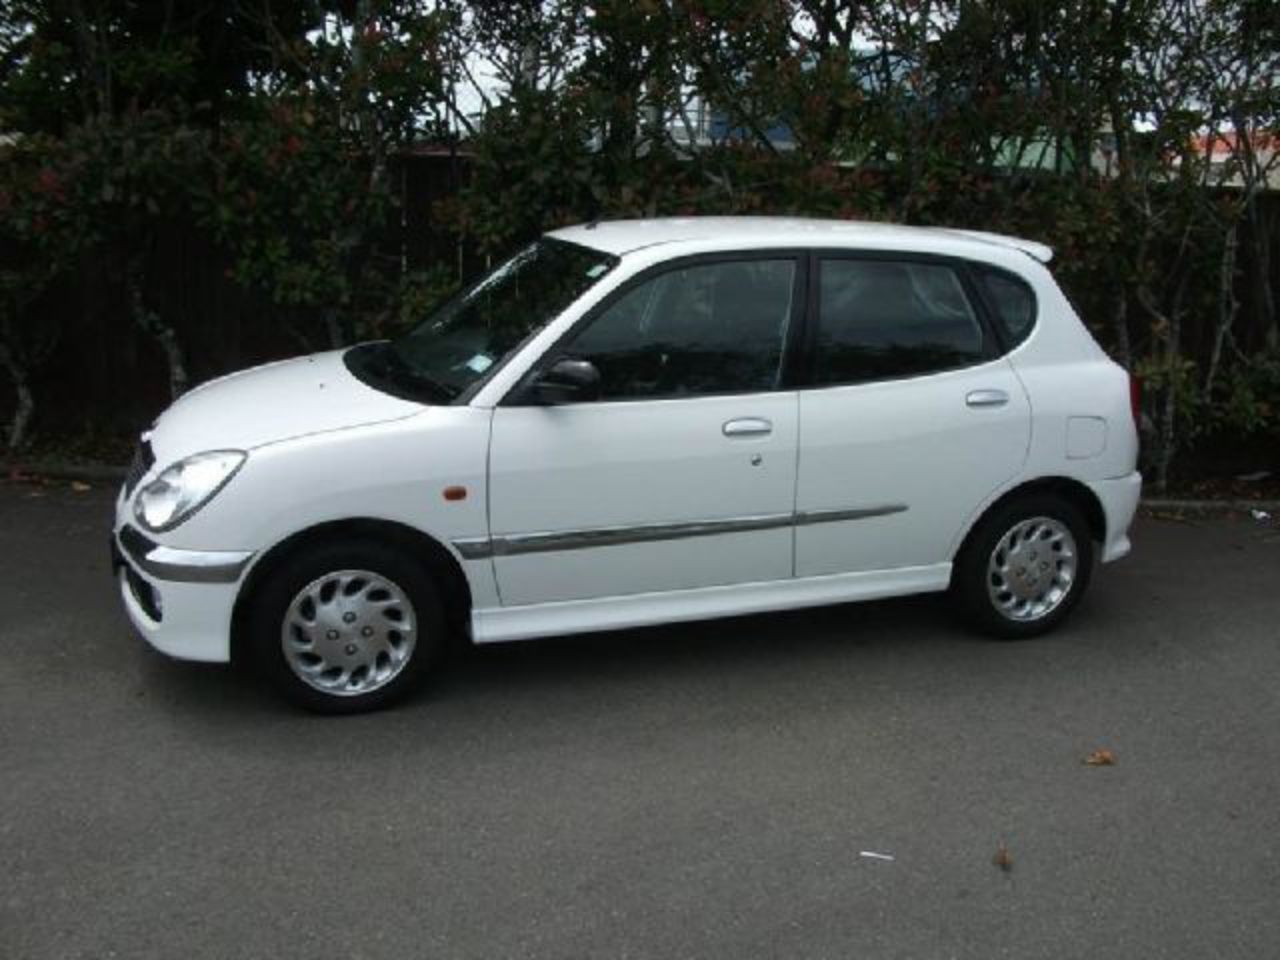 Daihatsu Sirion 13 GS: Photo gallery, complete information about ...